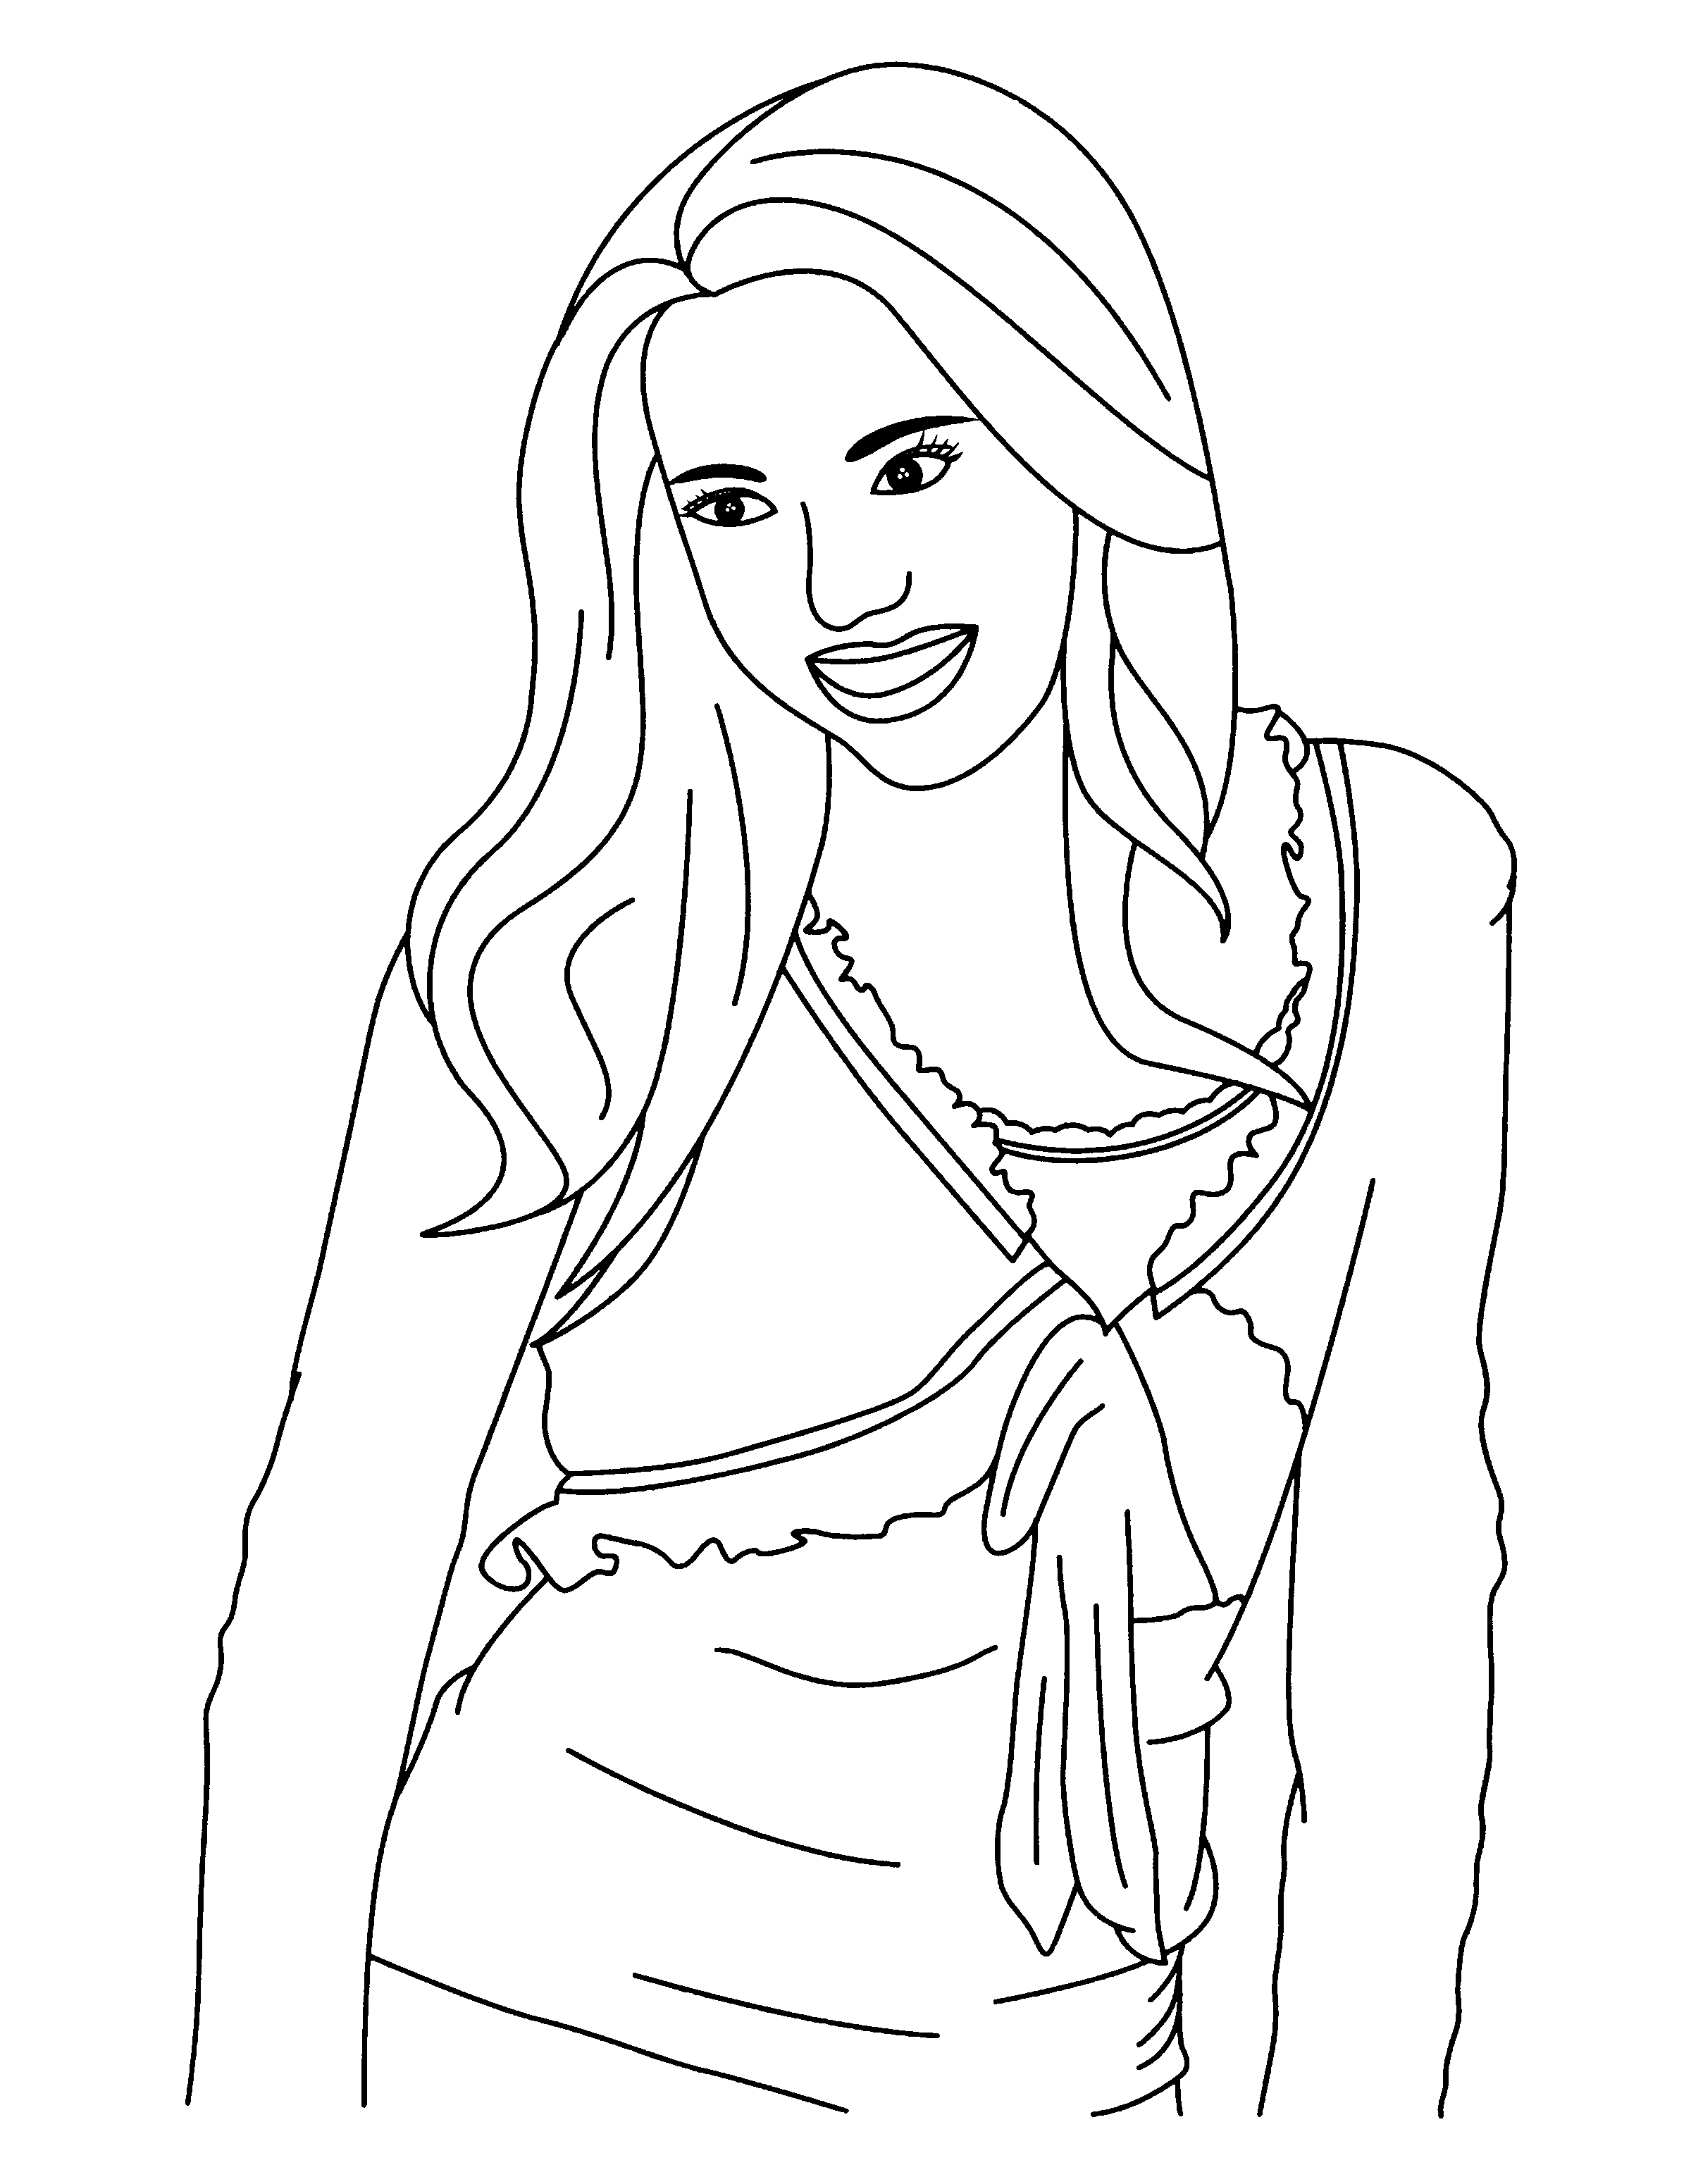 miley cyrus and hannah montana coloring pages - Clip Art Library